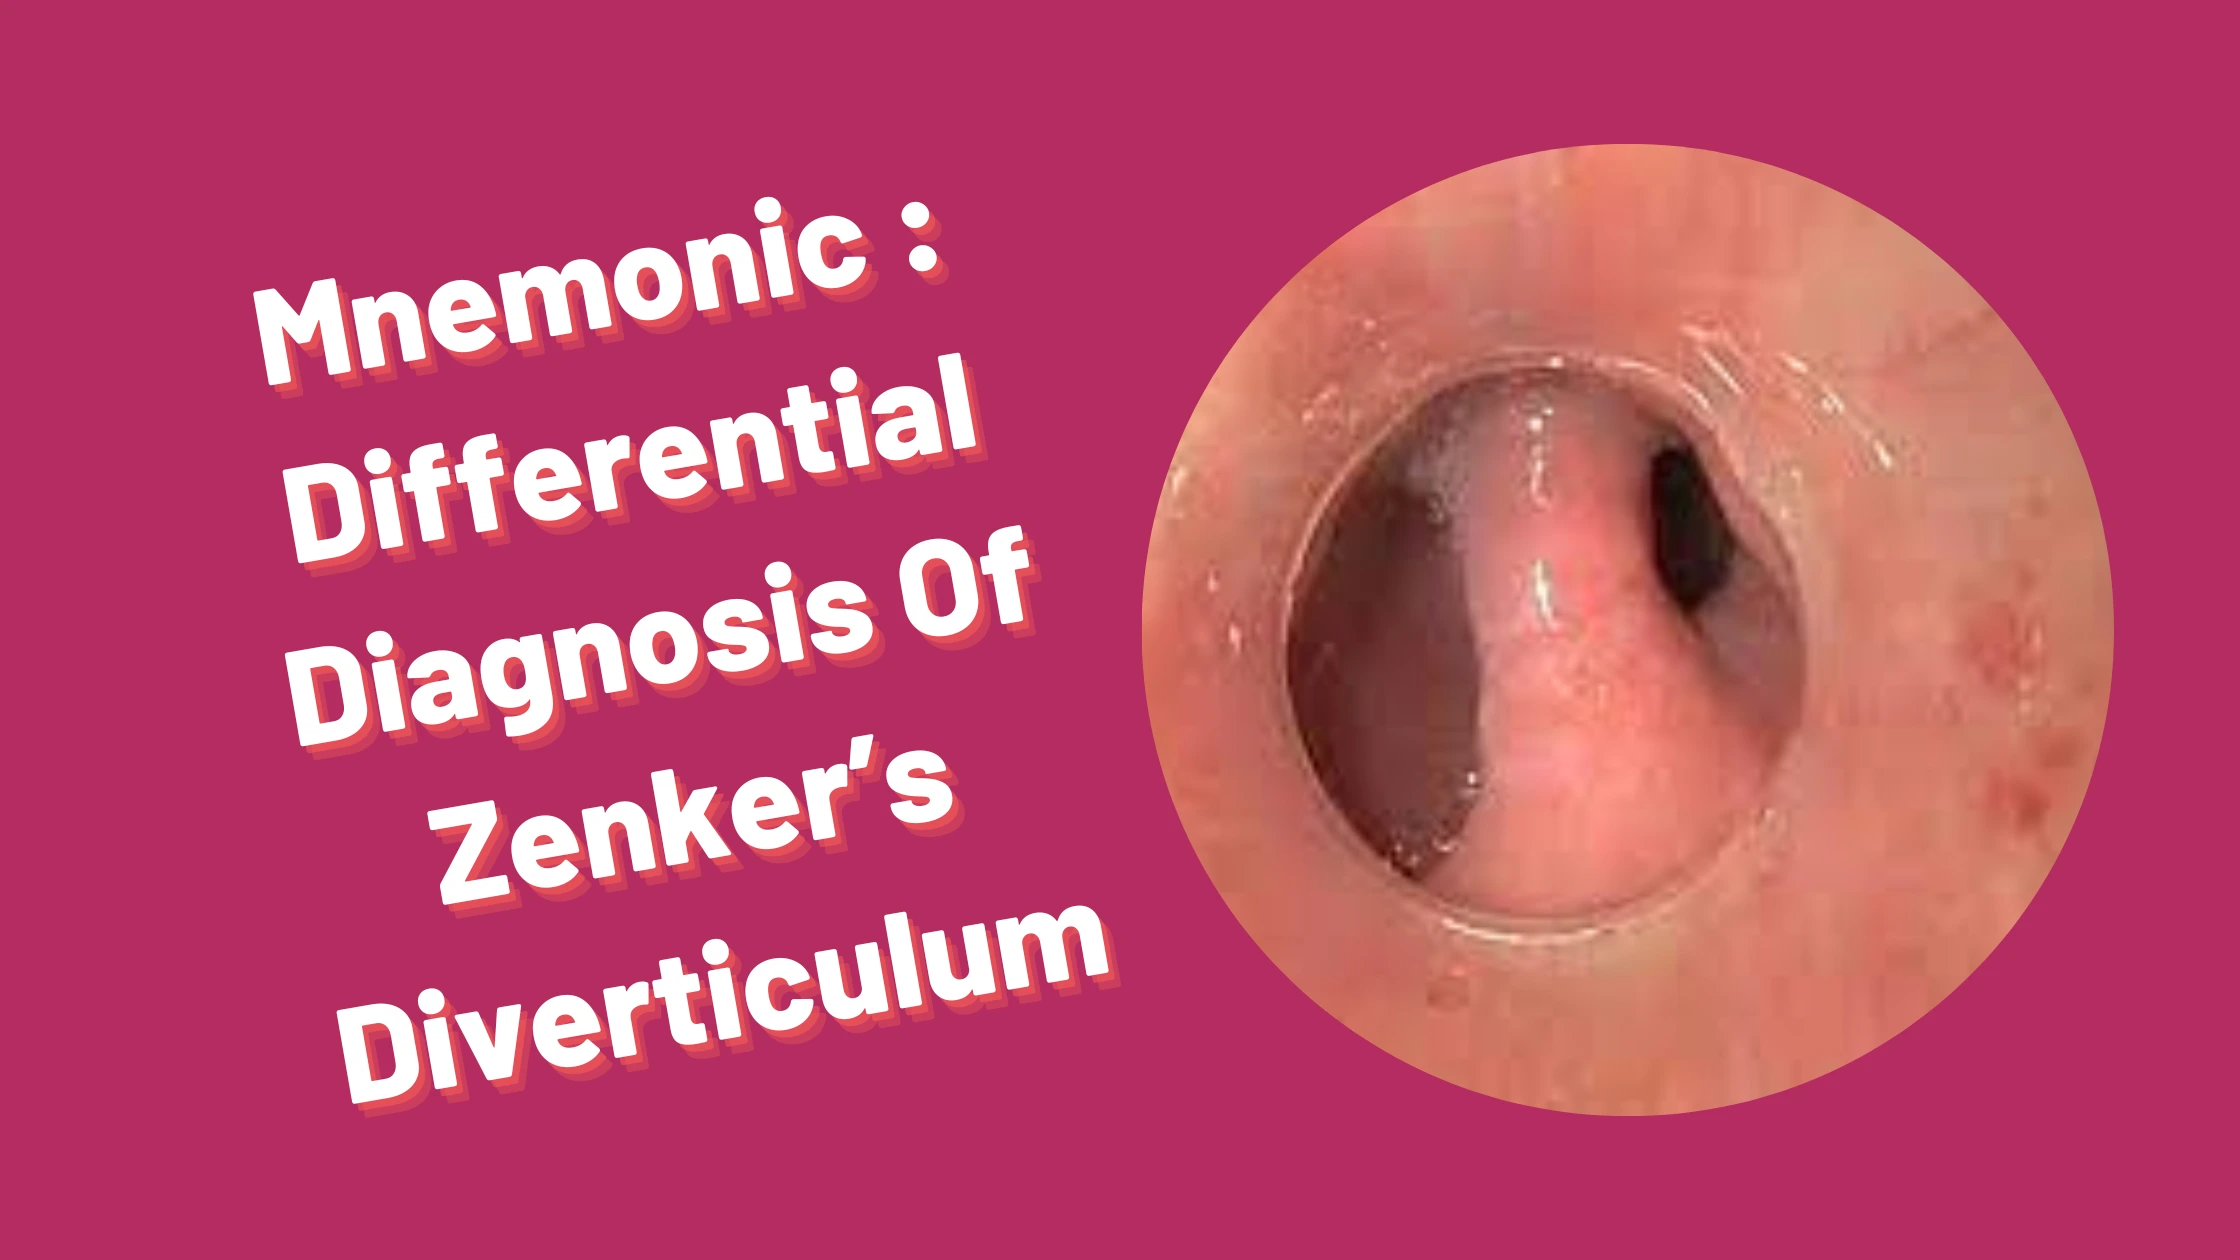 You are currently viewing [Very Cool] Mnemonic : Differential Diagnosis Of Zenker’s Diverticulum